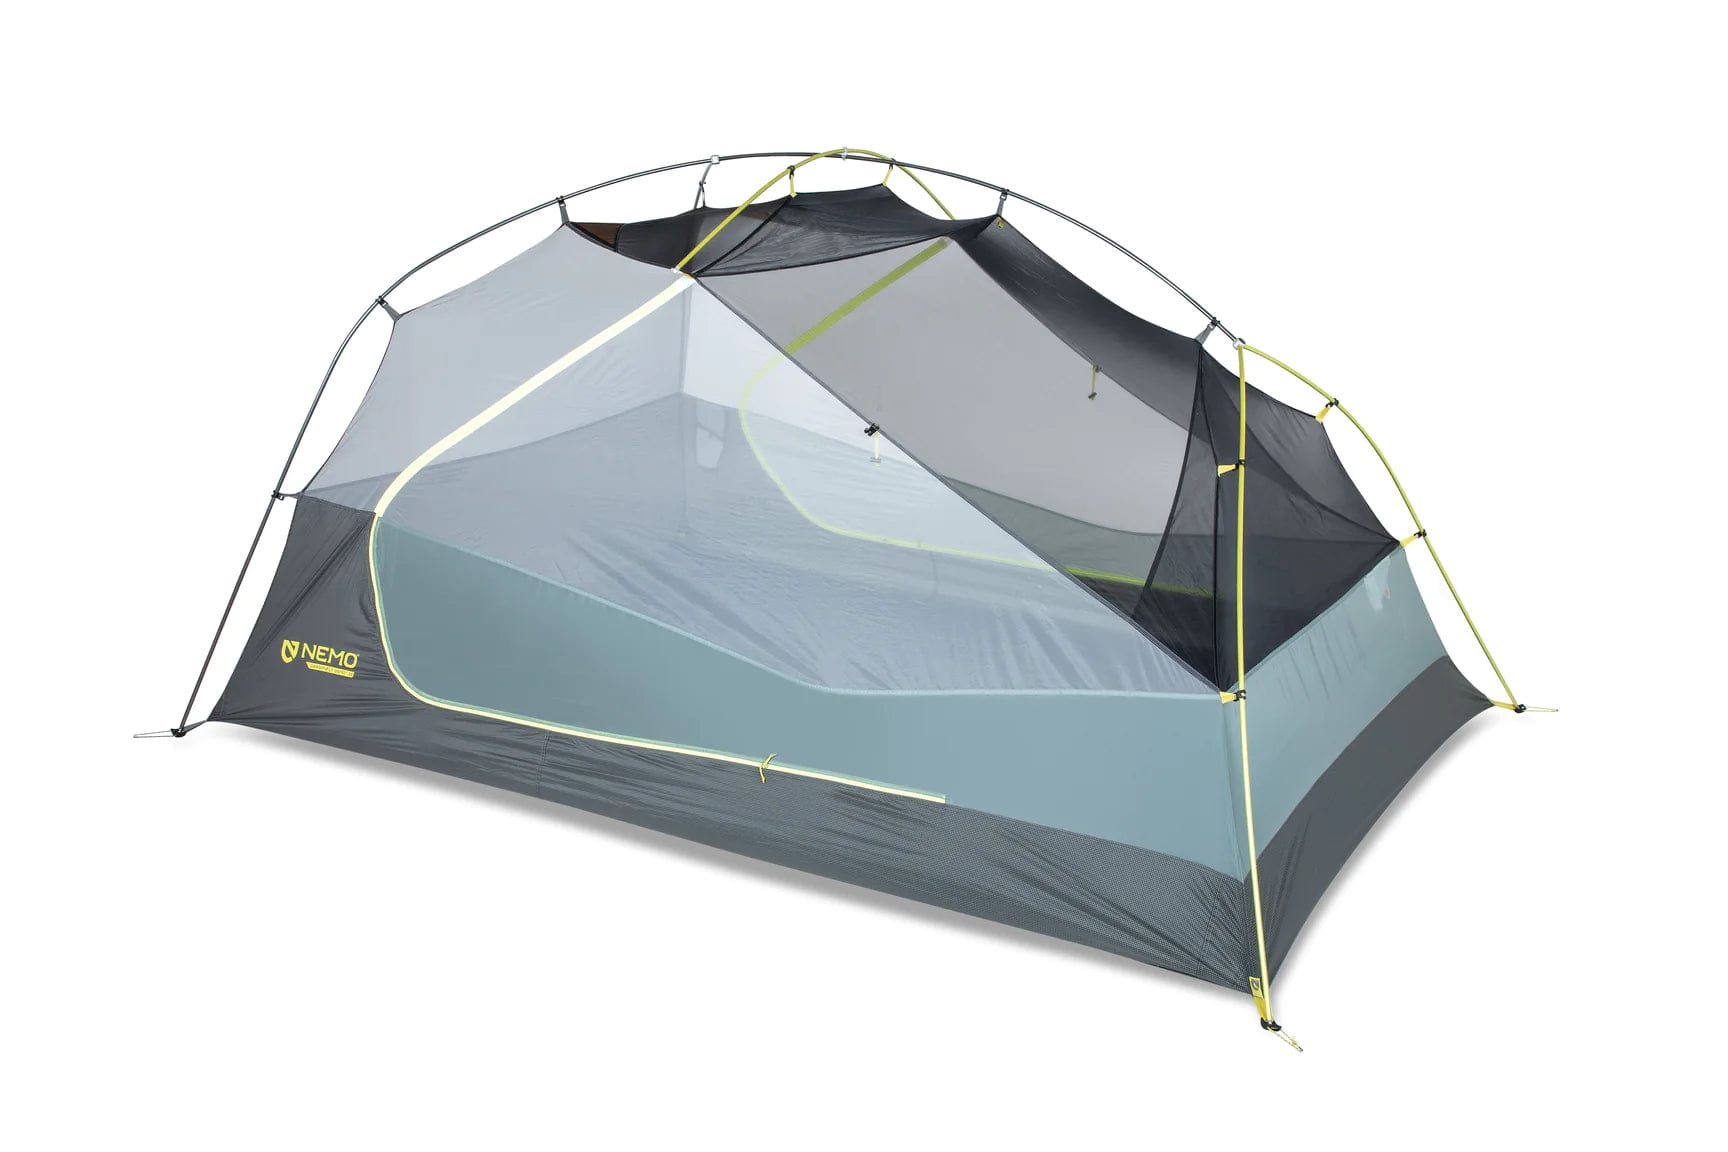 Nemo Tent 3 Person Dragonfly OSMO Ultralight Backpacking Tent NEM00281